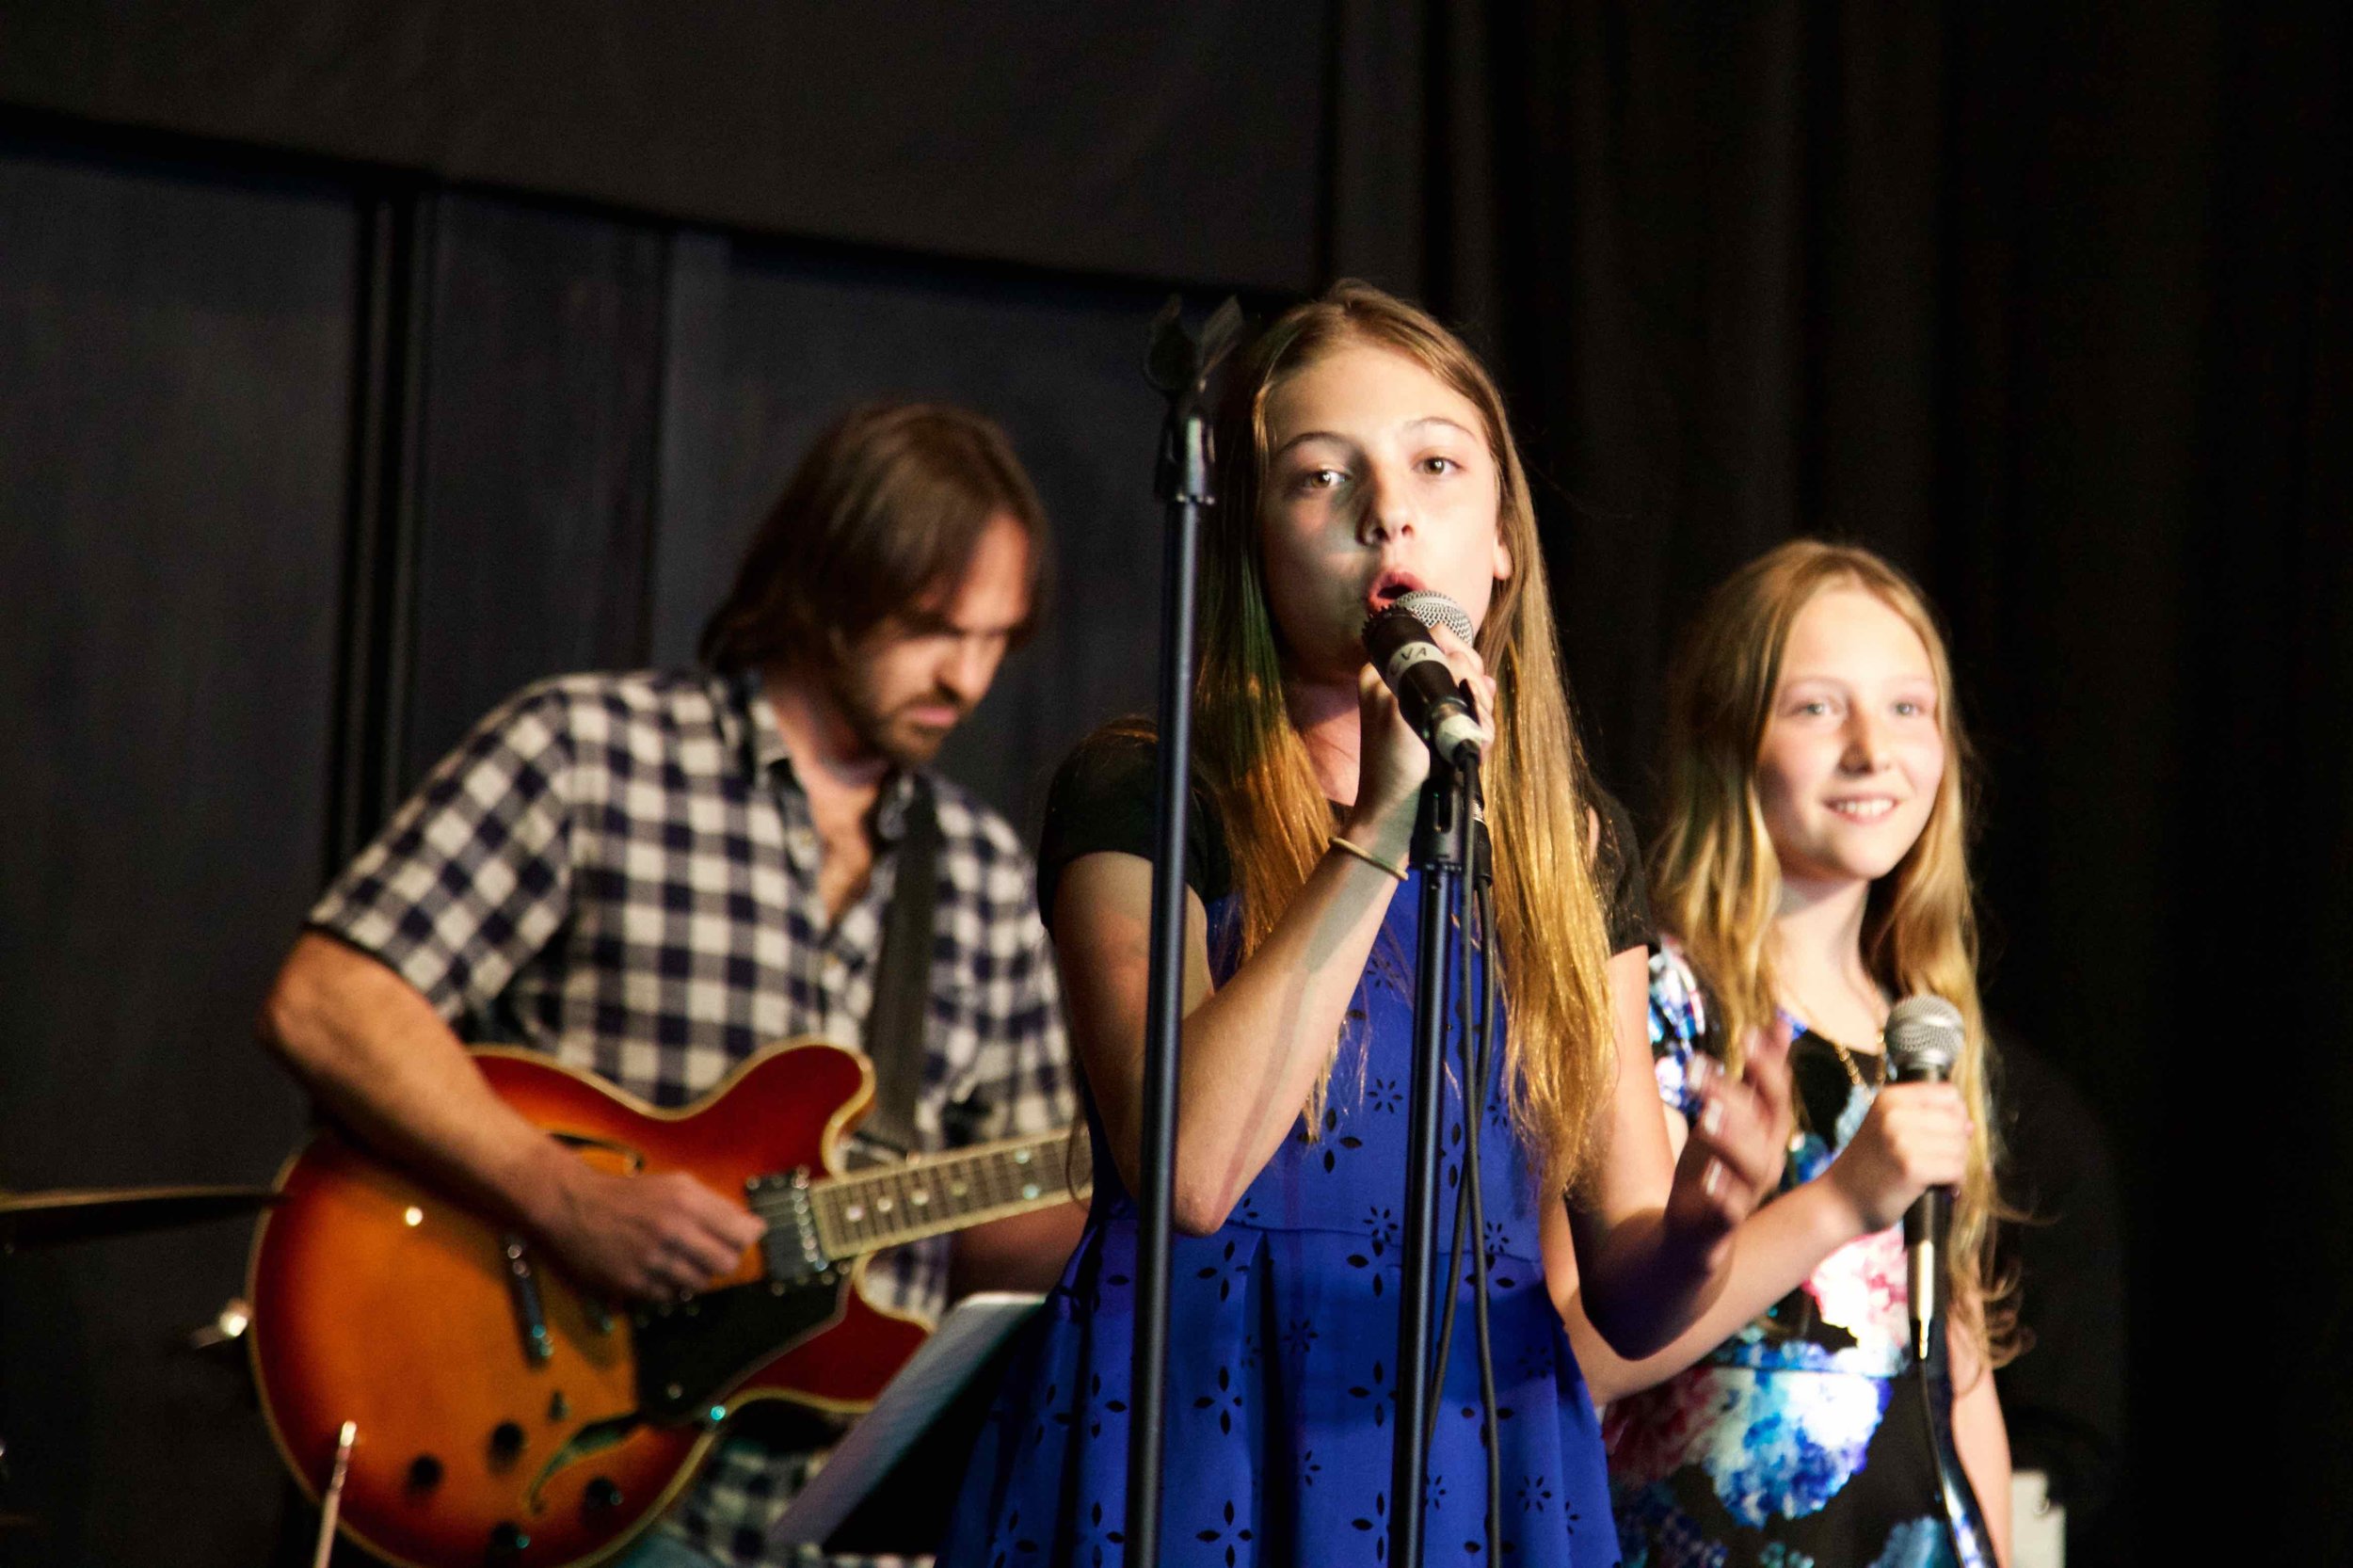 Redmond voice lessons for kids, teens, and adults at Cascade Voice Academy (formerly Issaquah Voice Studio)